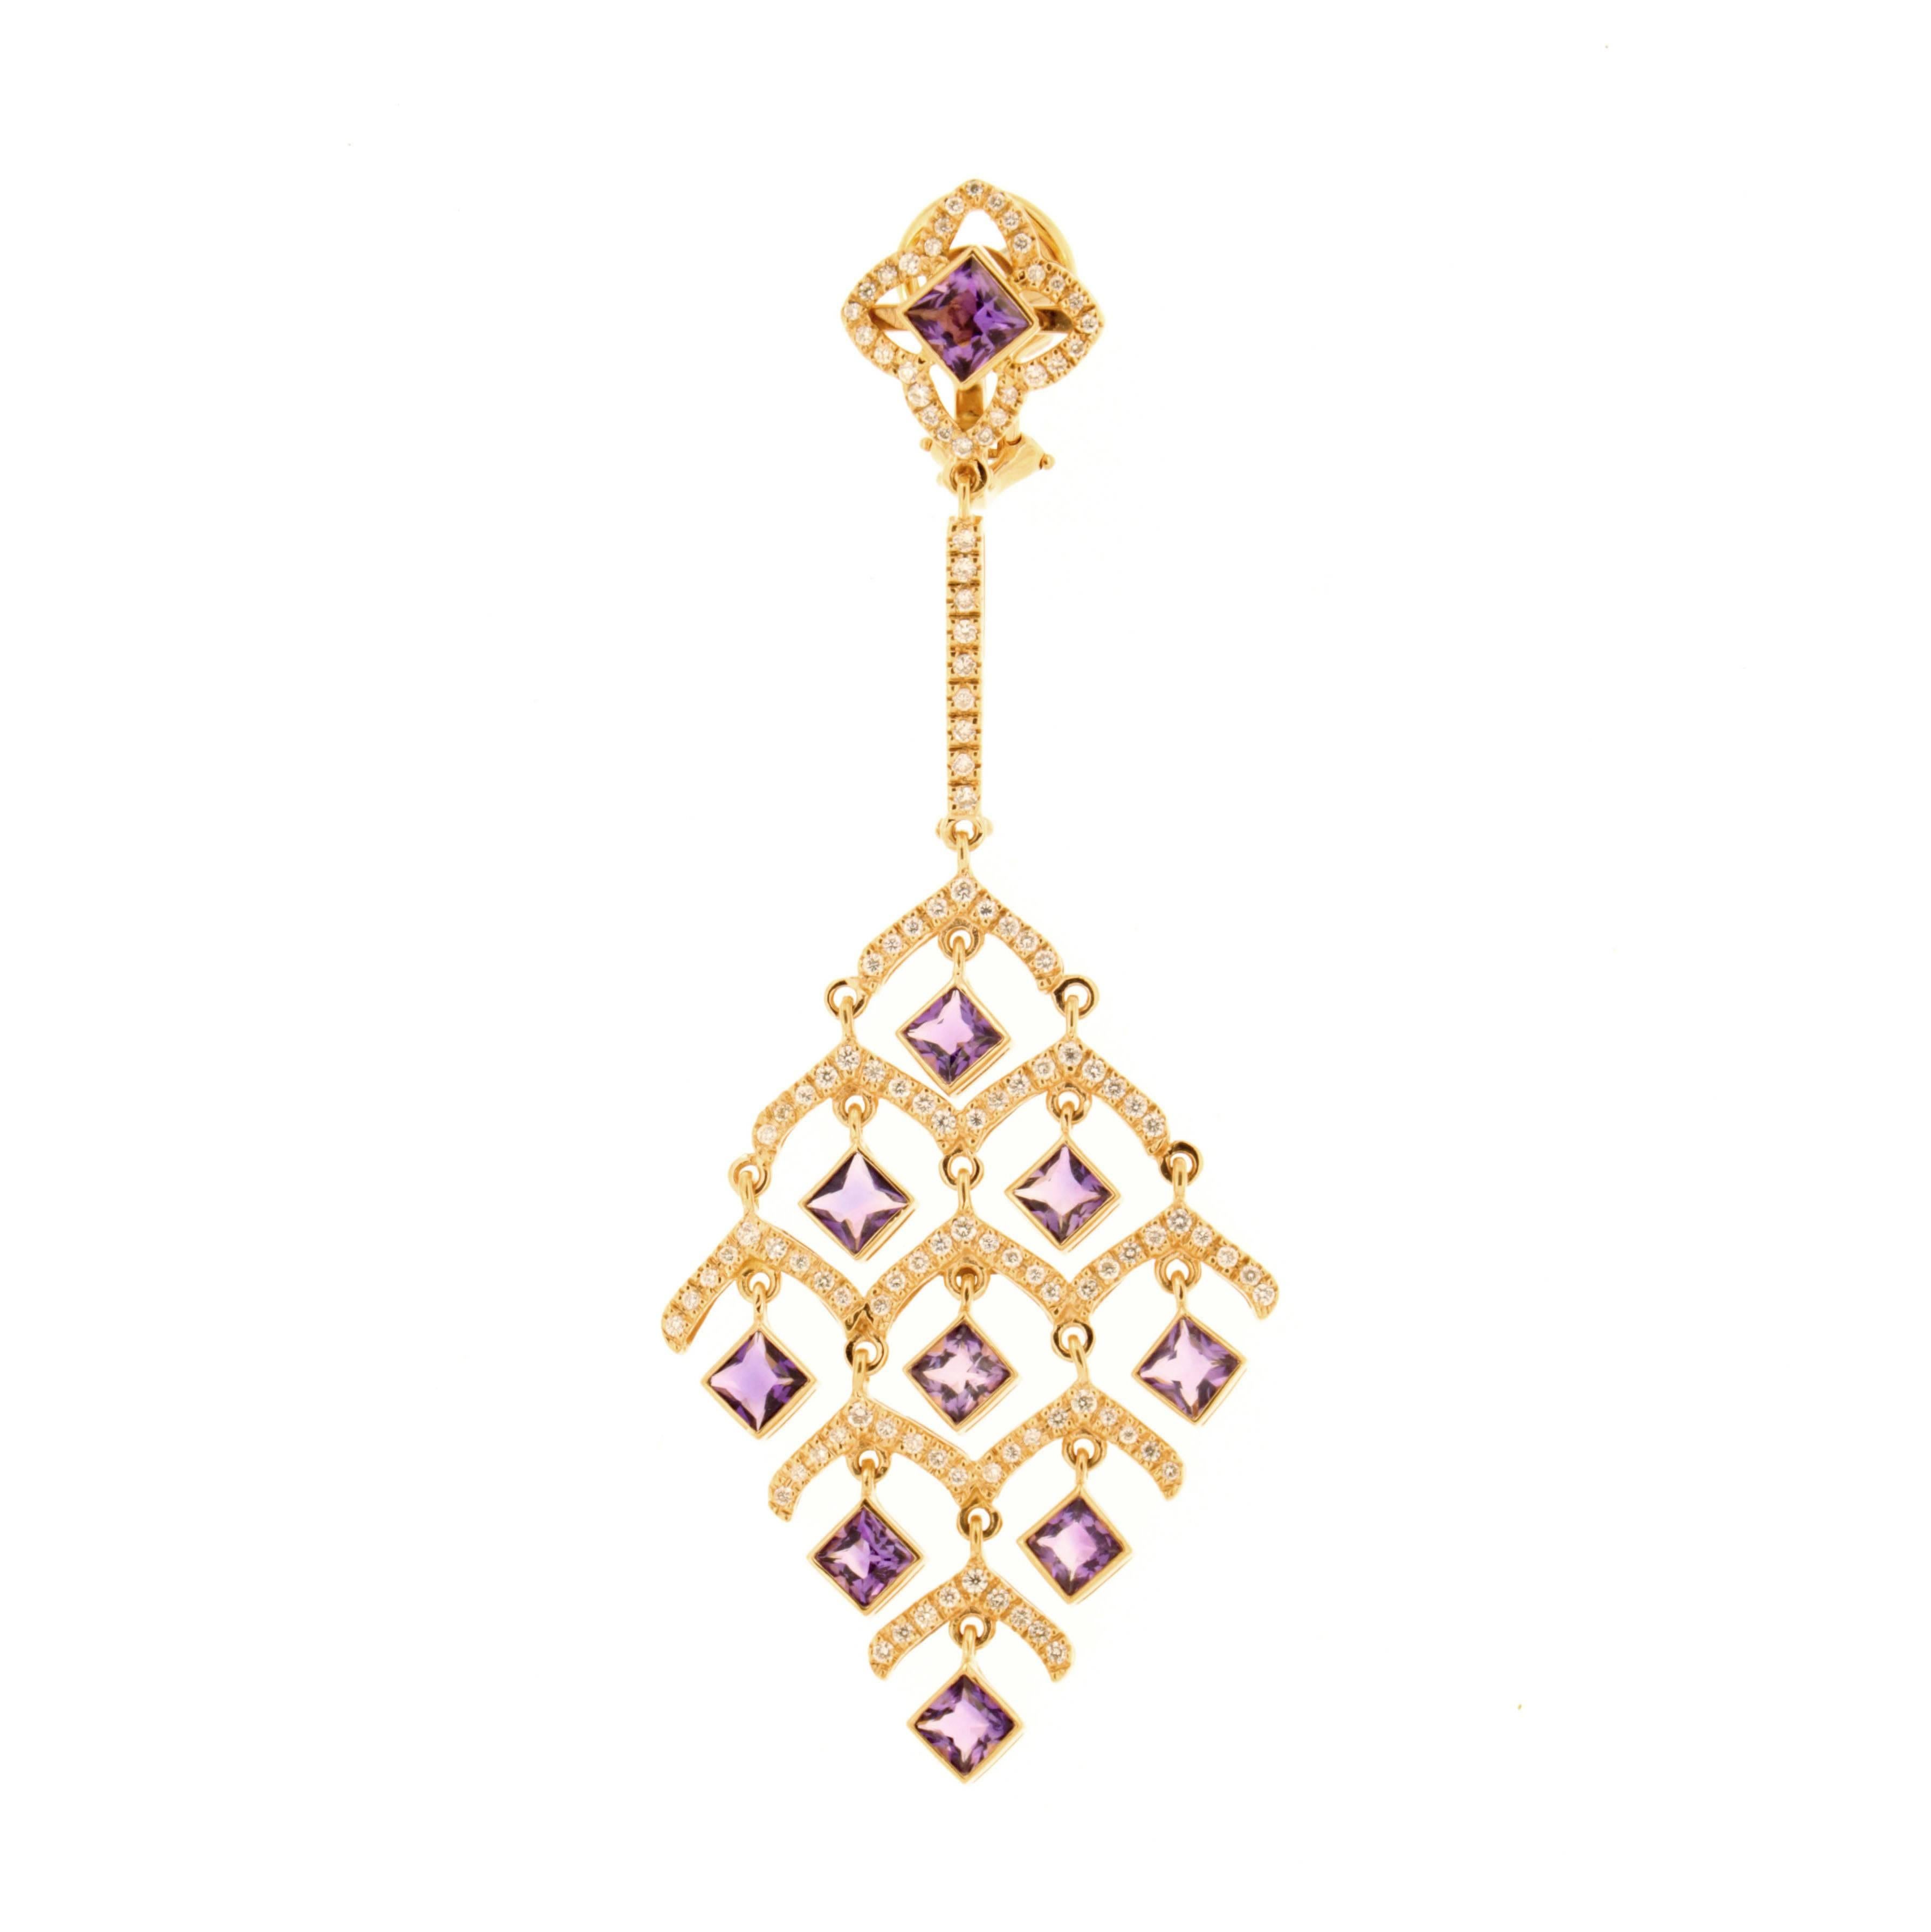 The definite bold and classic statement piece! Zorab's 7.27 Carat Amethyst Quartz and 1.98 Carat White Diamonds set on 18 Karat  Rose Gold stunning chandelier earrings do not require any complimentary pieces as it amounts to a full set of jewelry on